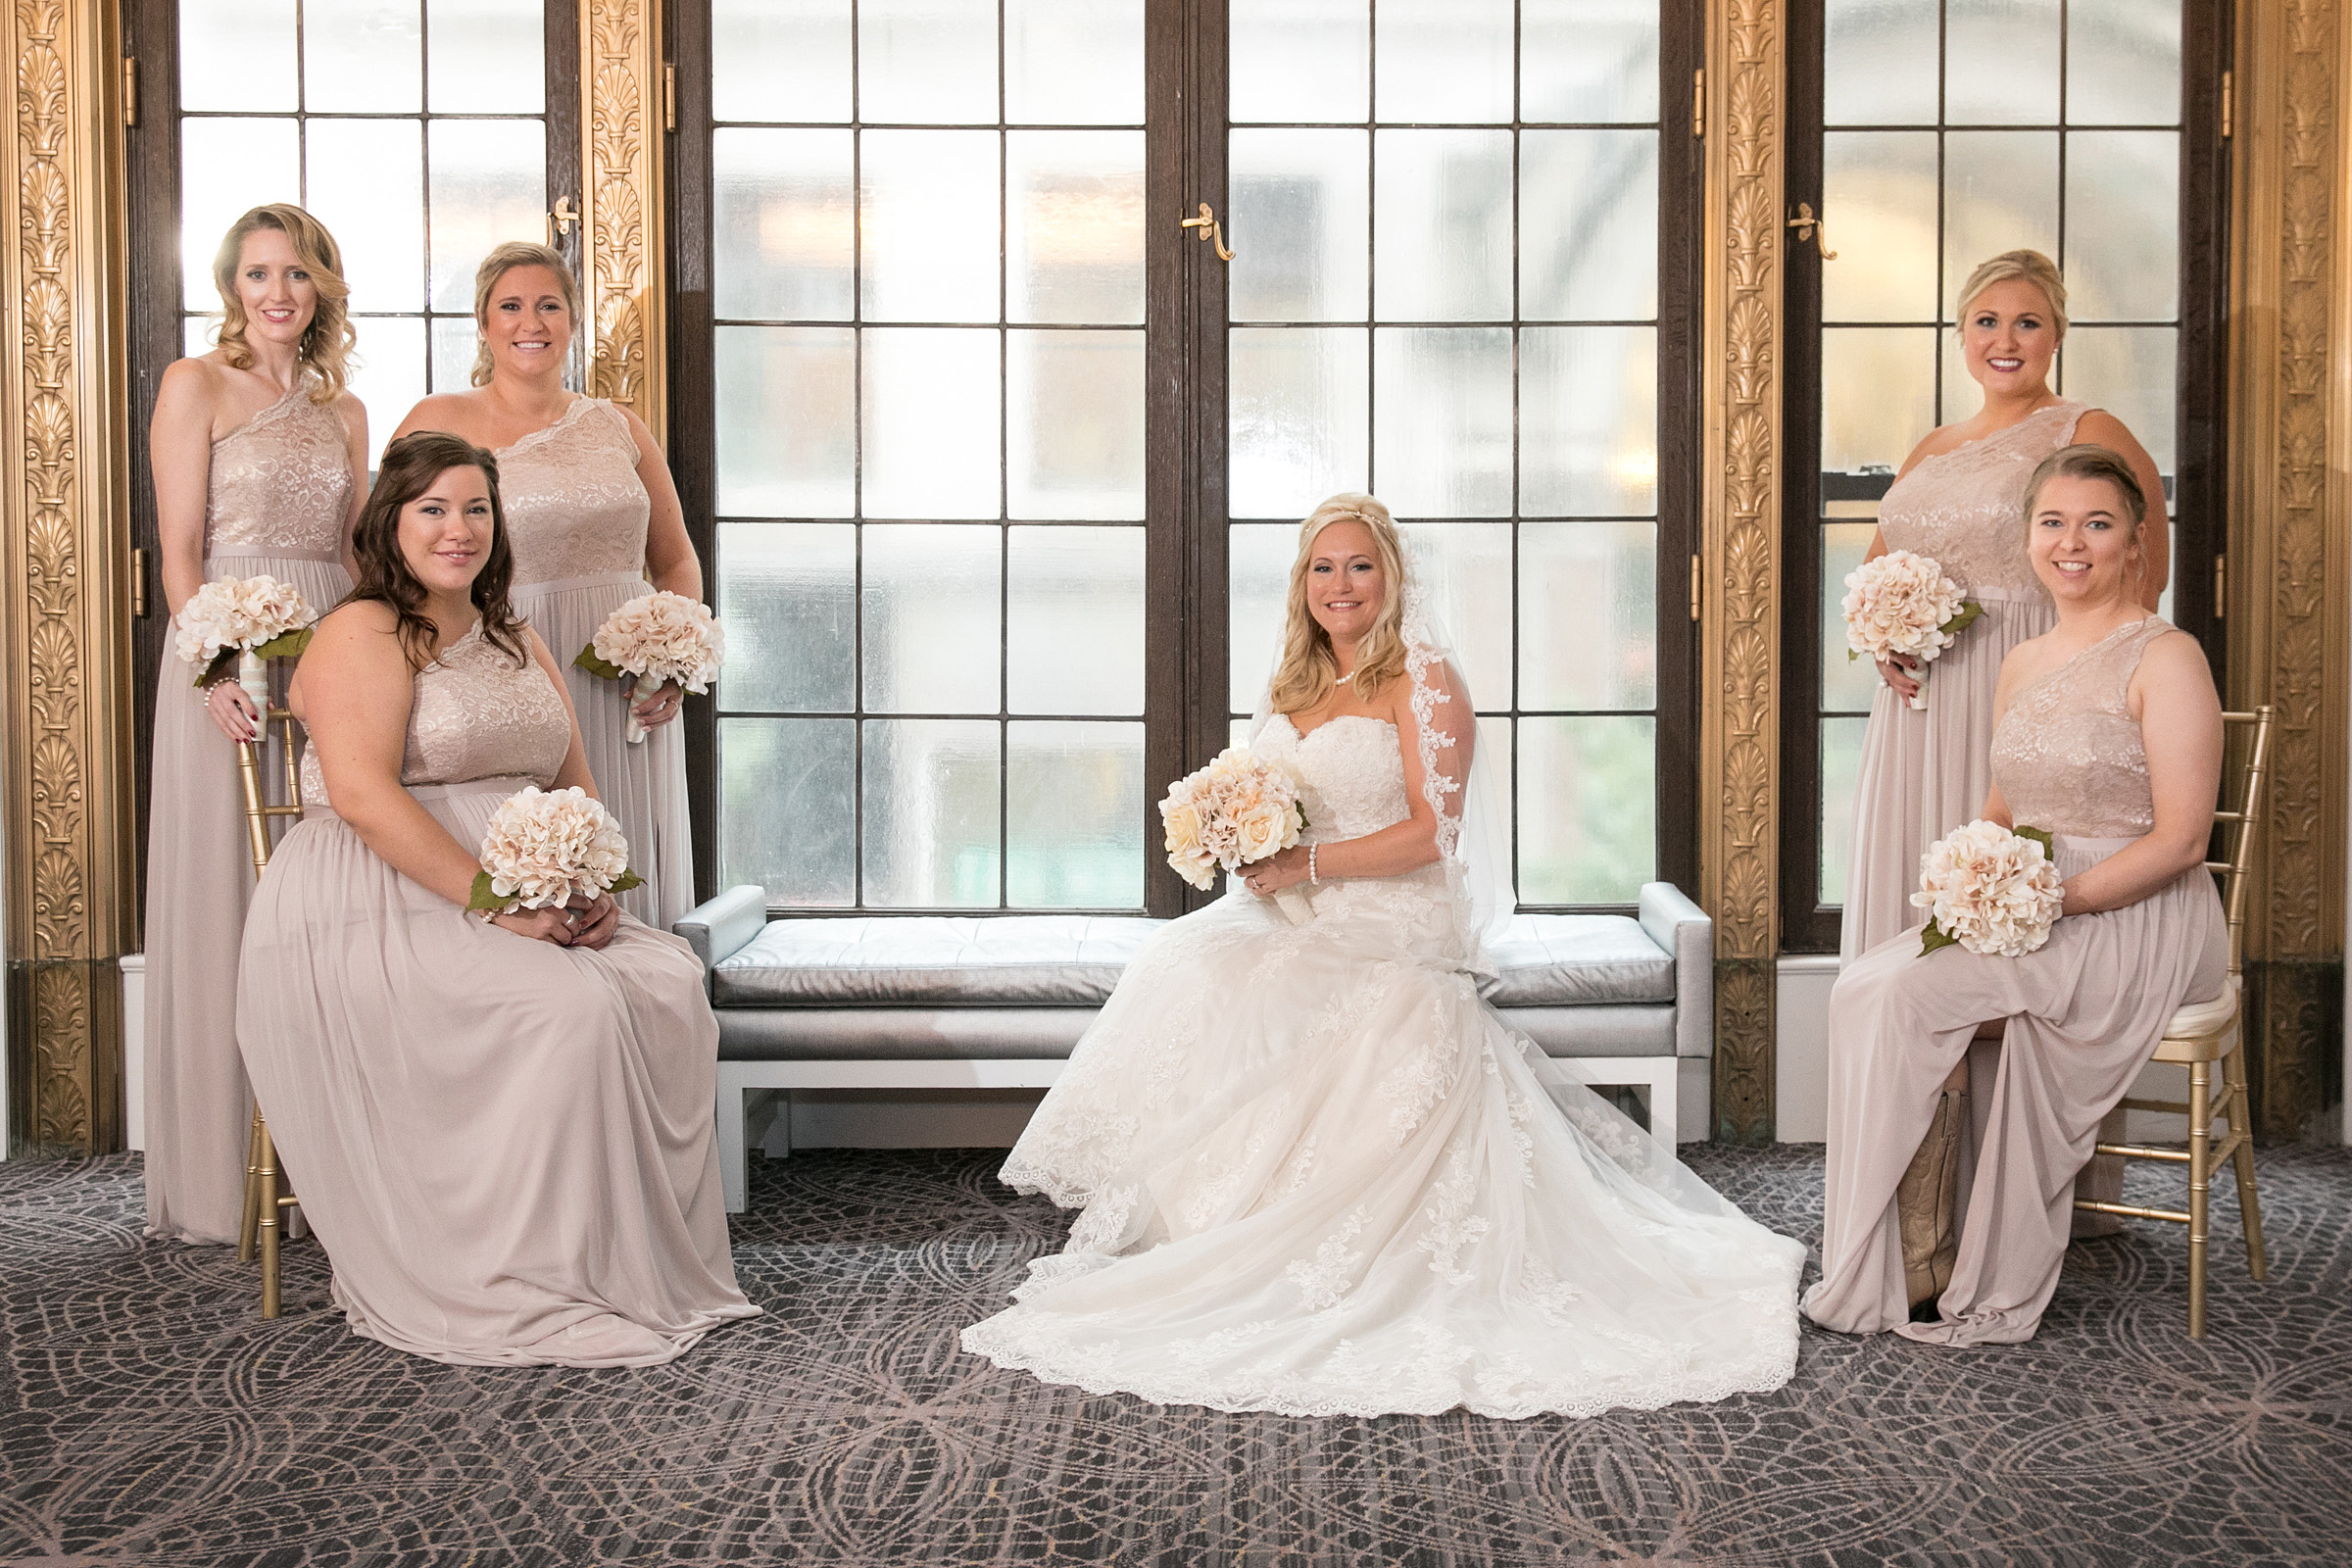 image of bride and bridesmaids